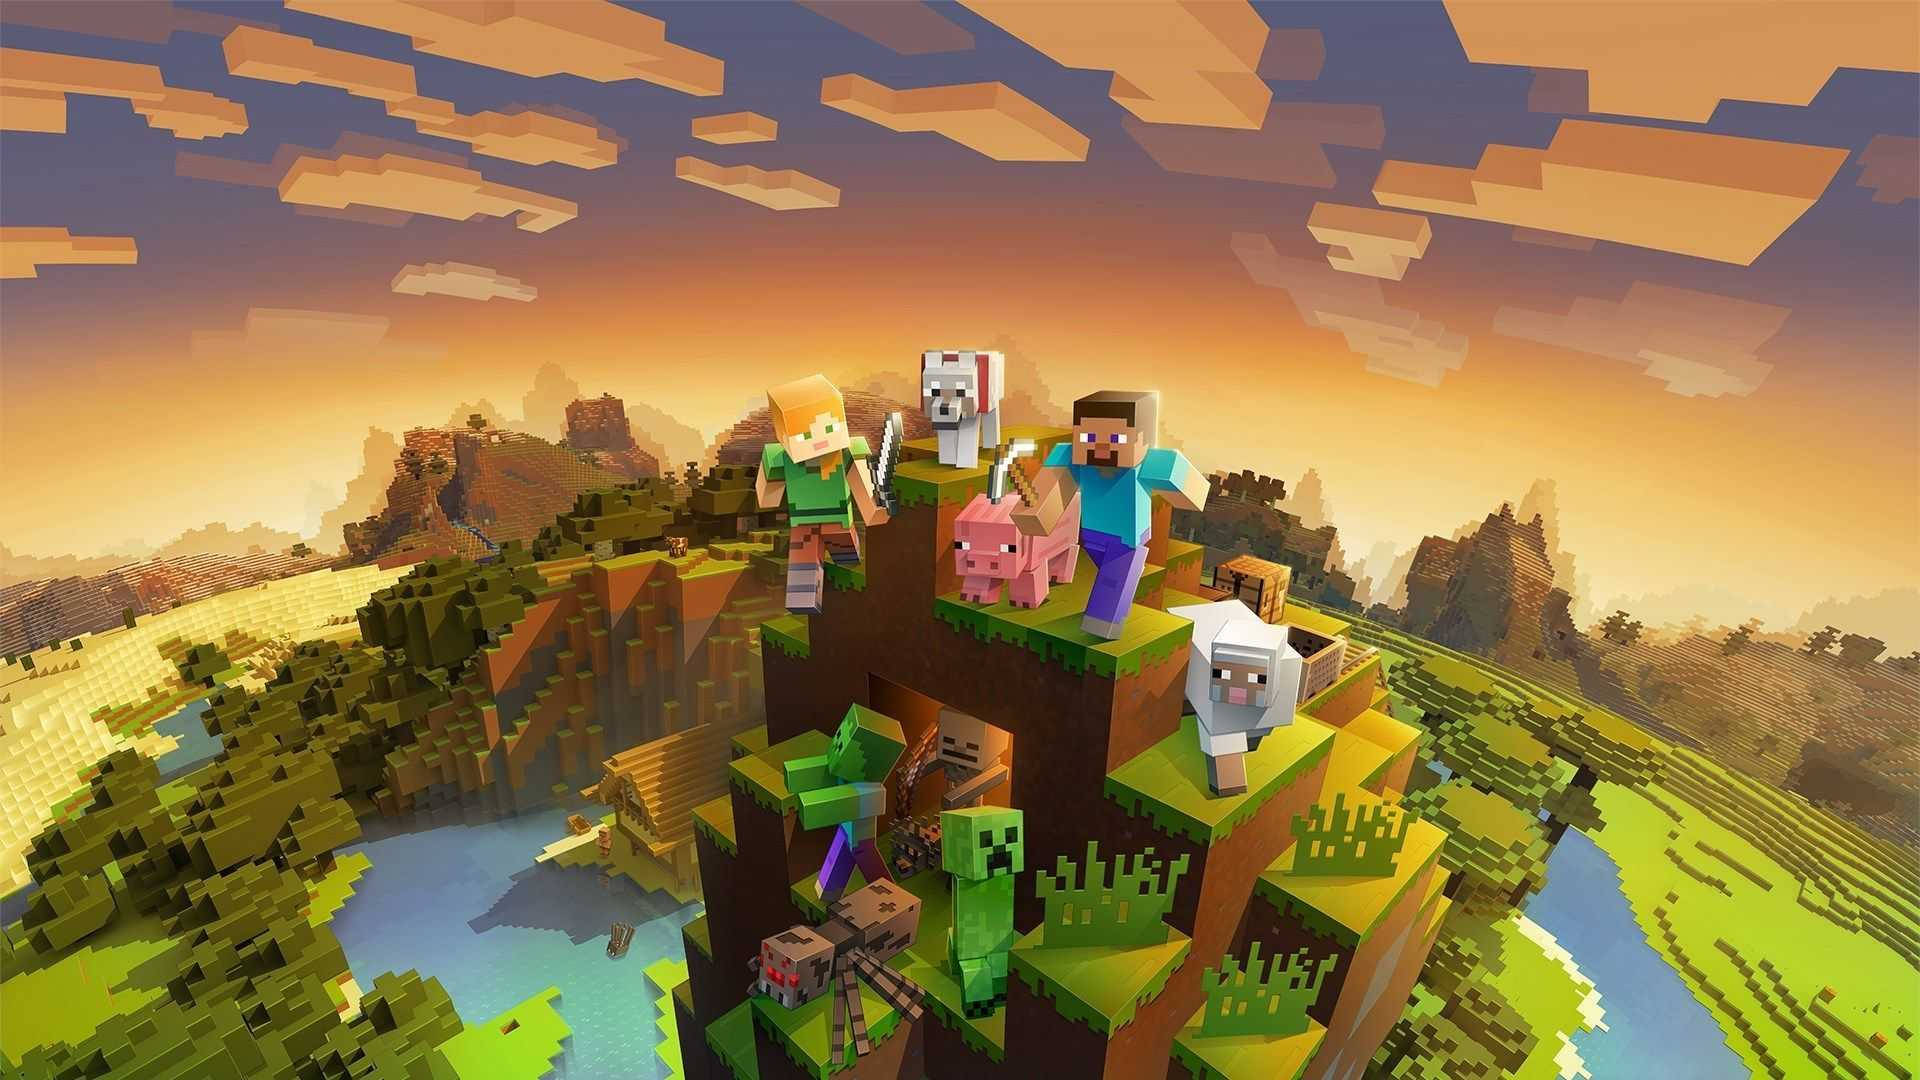 Characters On Mountain Minecraft Hd Wallpaper